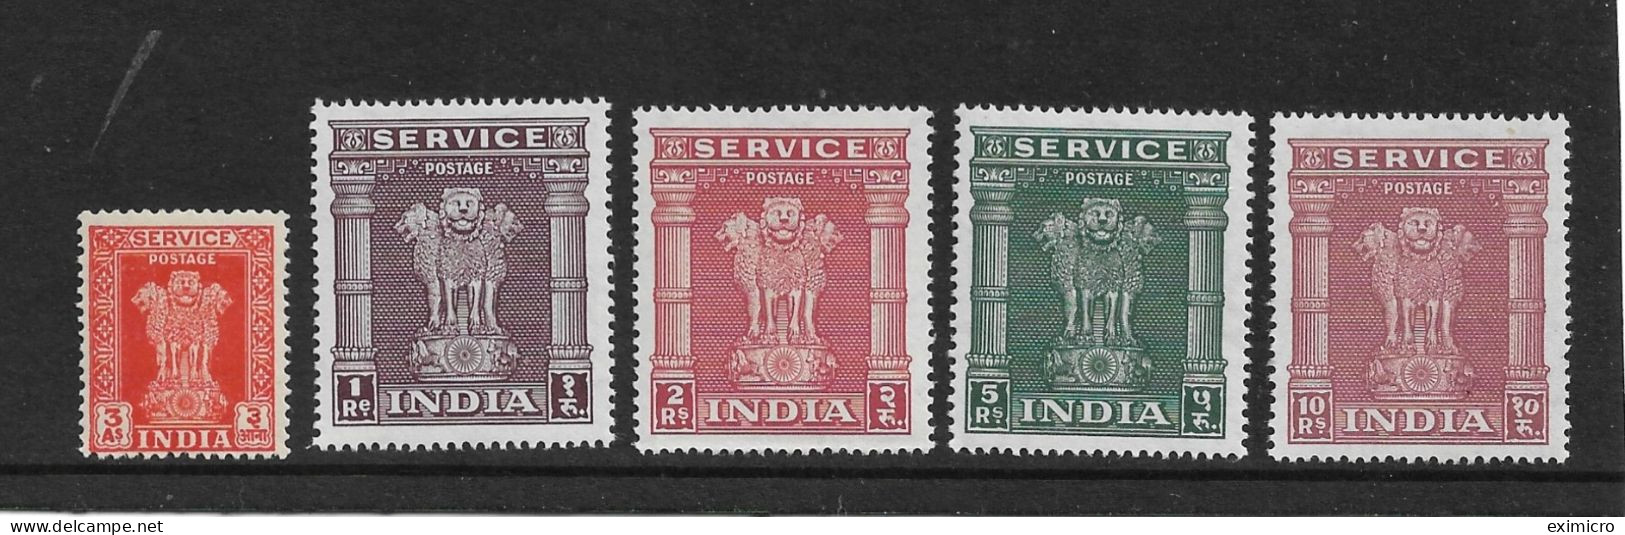 INDIA 1950 - 1951 OFFICIALS 3a, 1R - 10R SG O156, O161 - O164 UNMOUNTED MINT Cat £27.75 - Dienstmarken